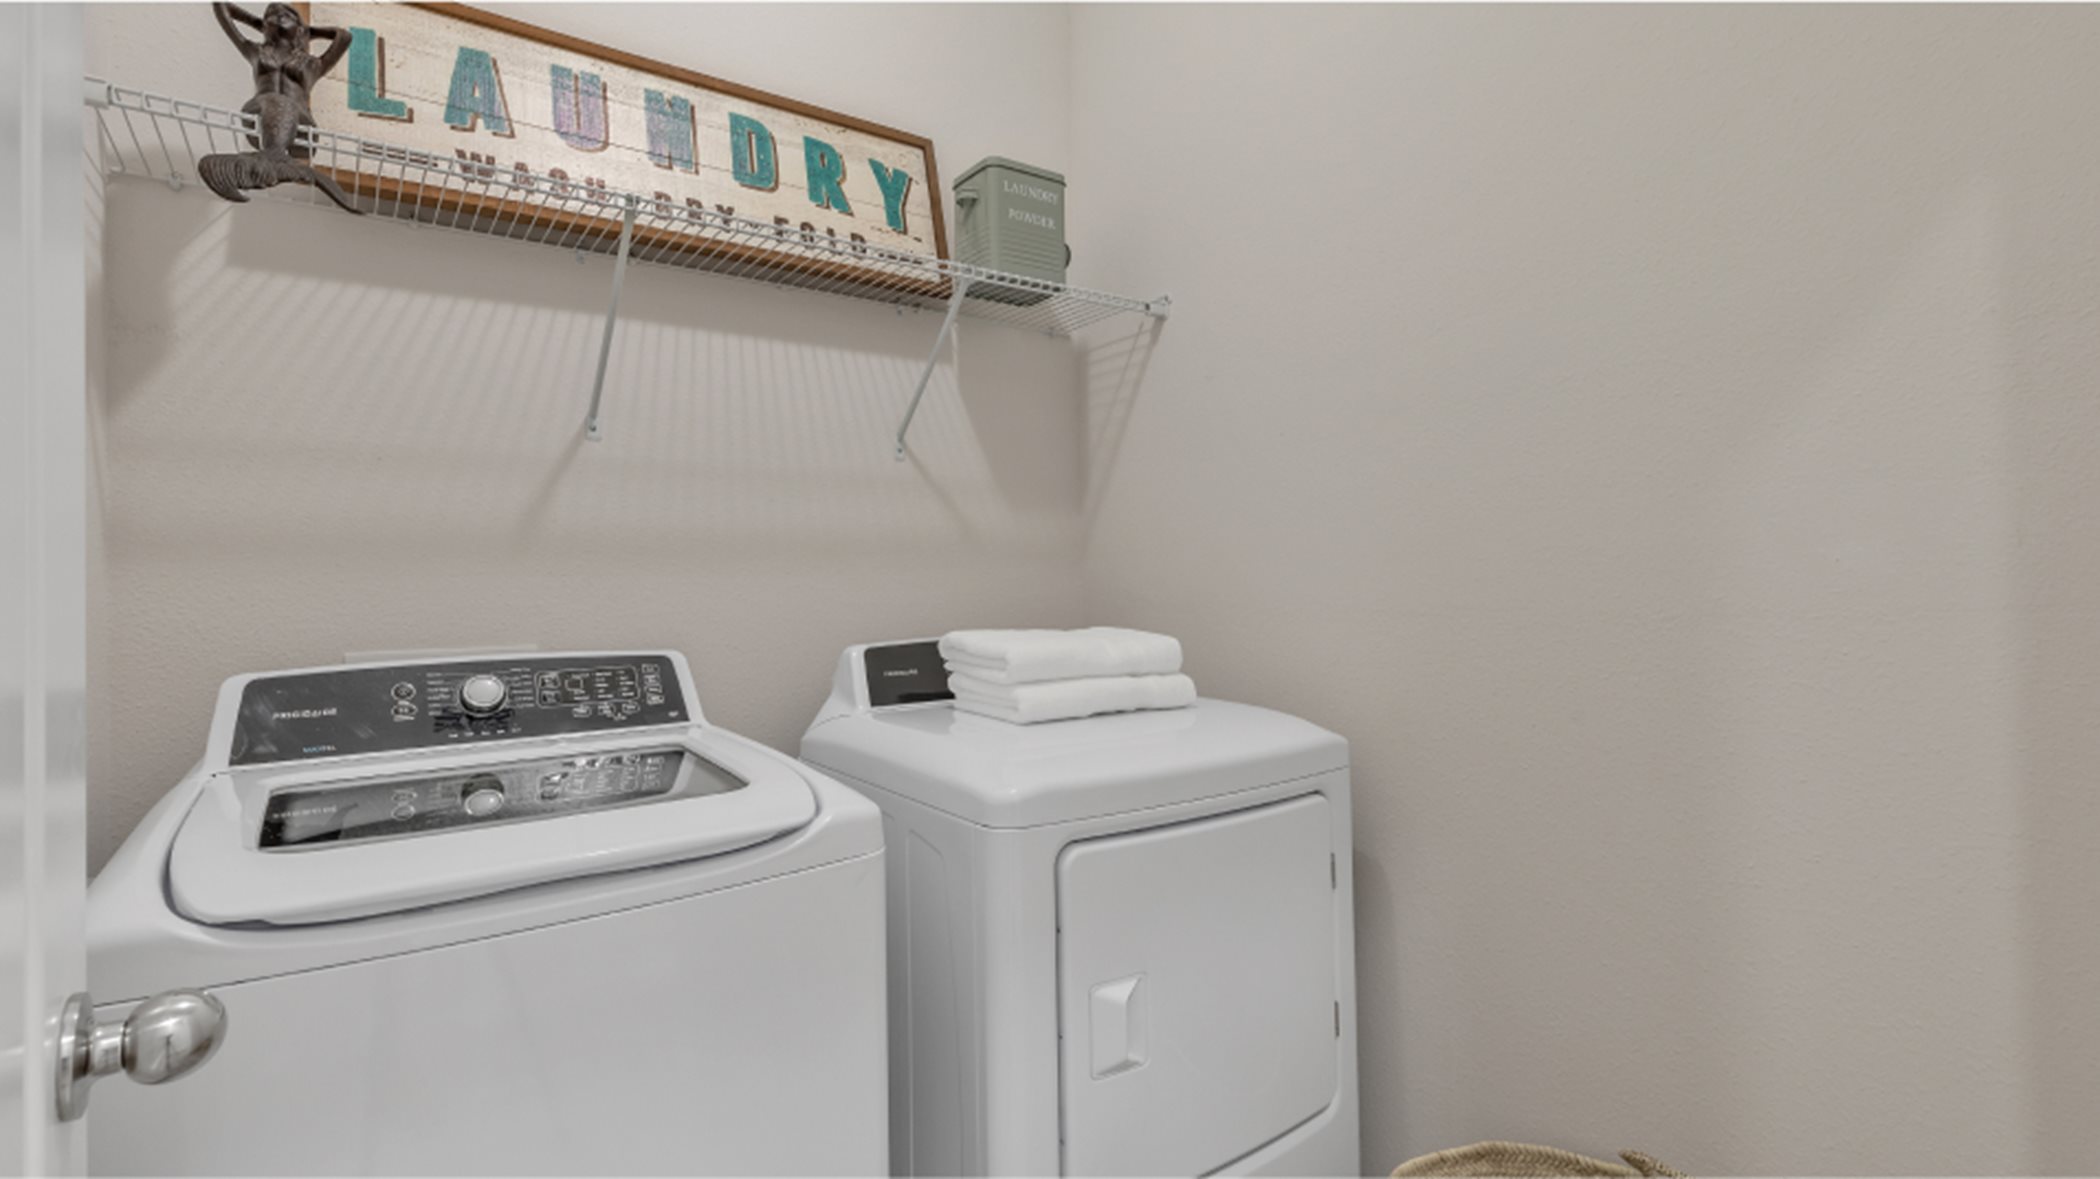 TrailMark INDEPENDENCE Washer and Dryer